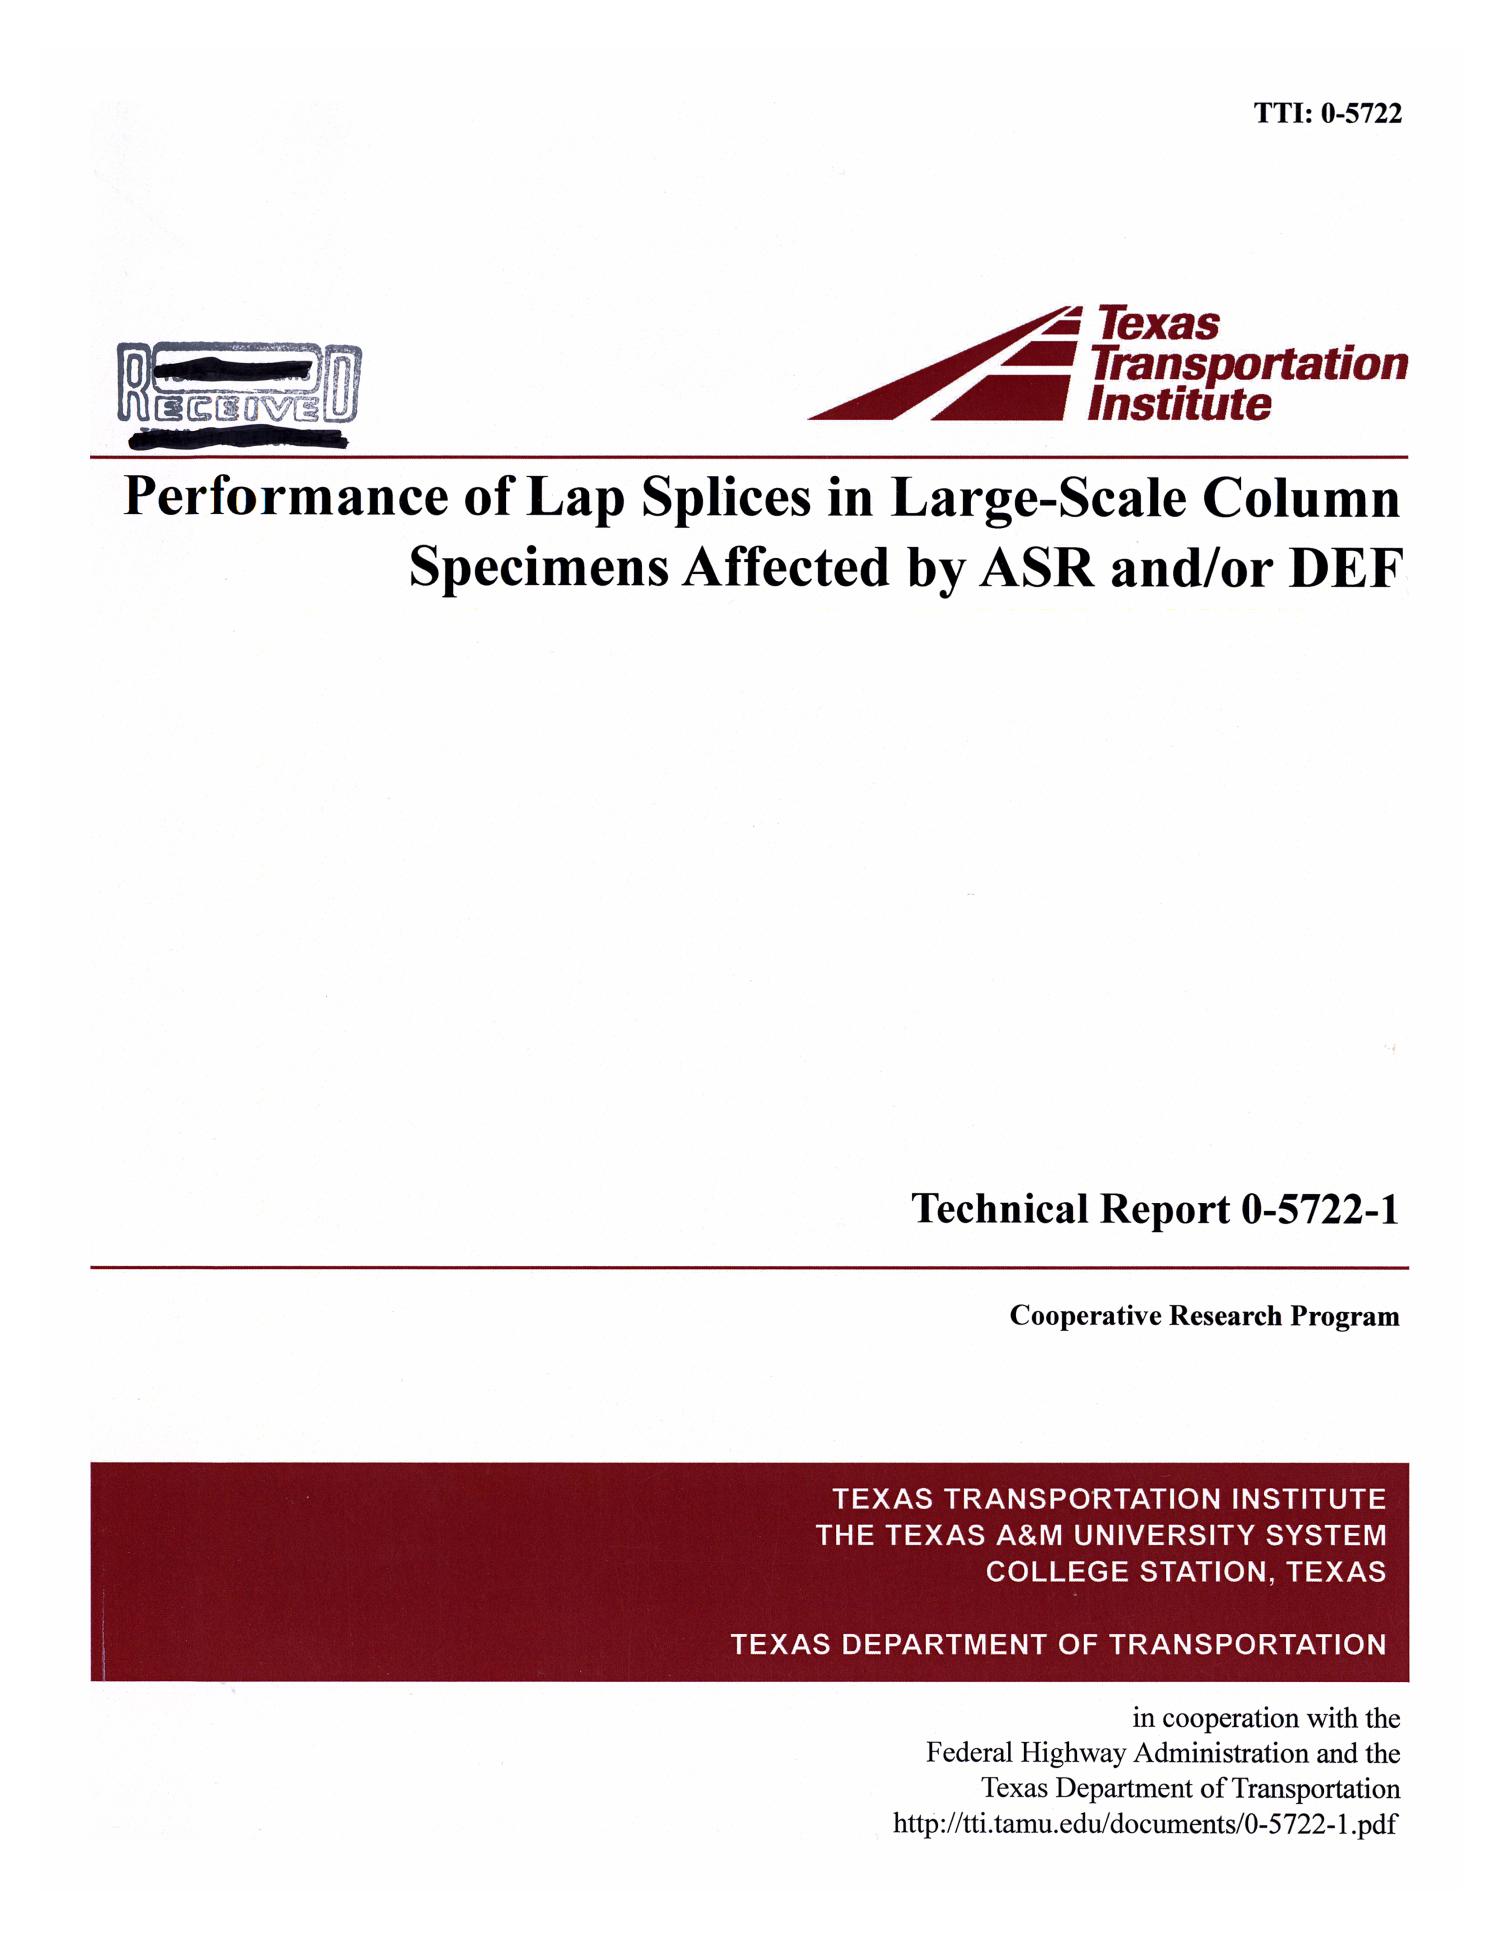 Performance of lap splices in large-scale column specimens affectedby ASR and/or DEF
                                                
                                                    Front Cover
                                                